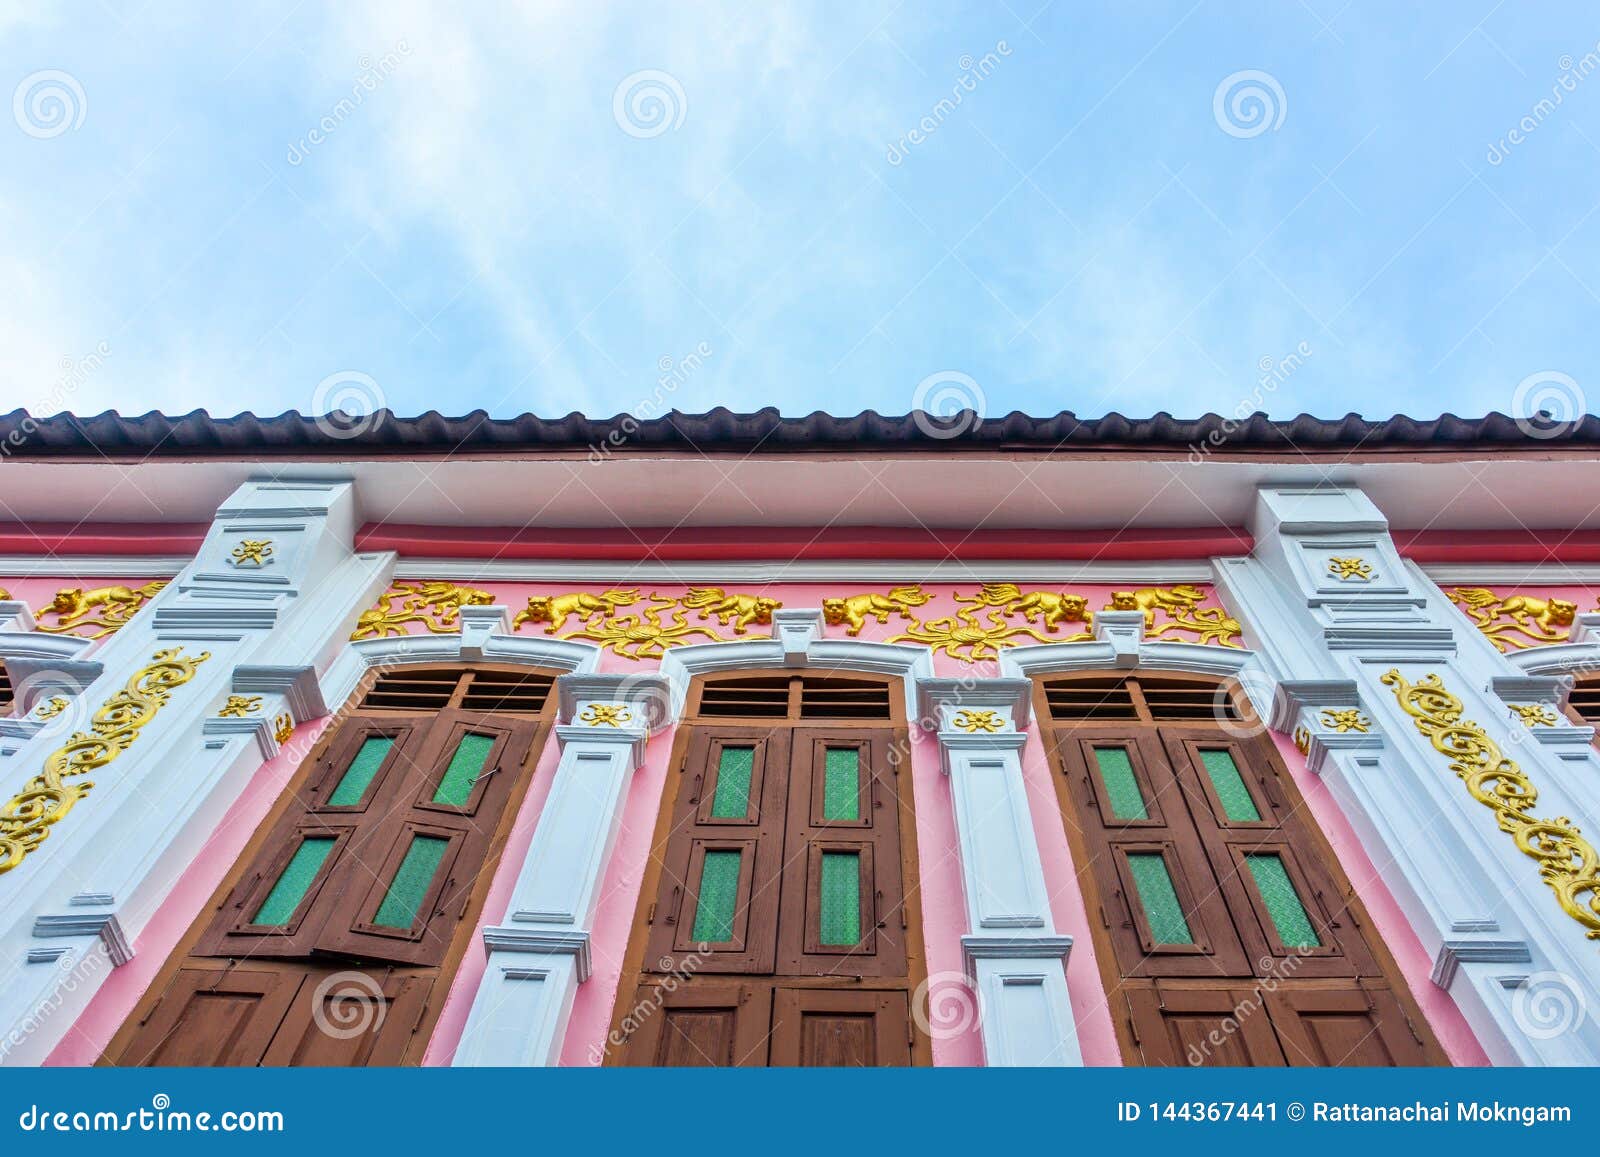 window with pink background in chino-portuguese style, phuket thailand